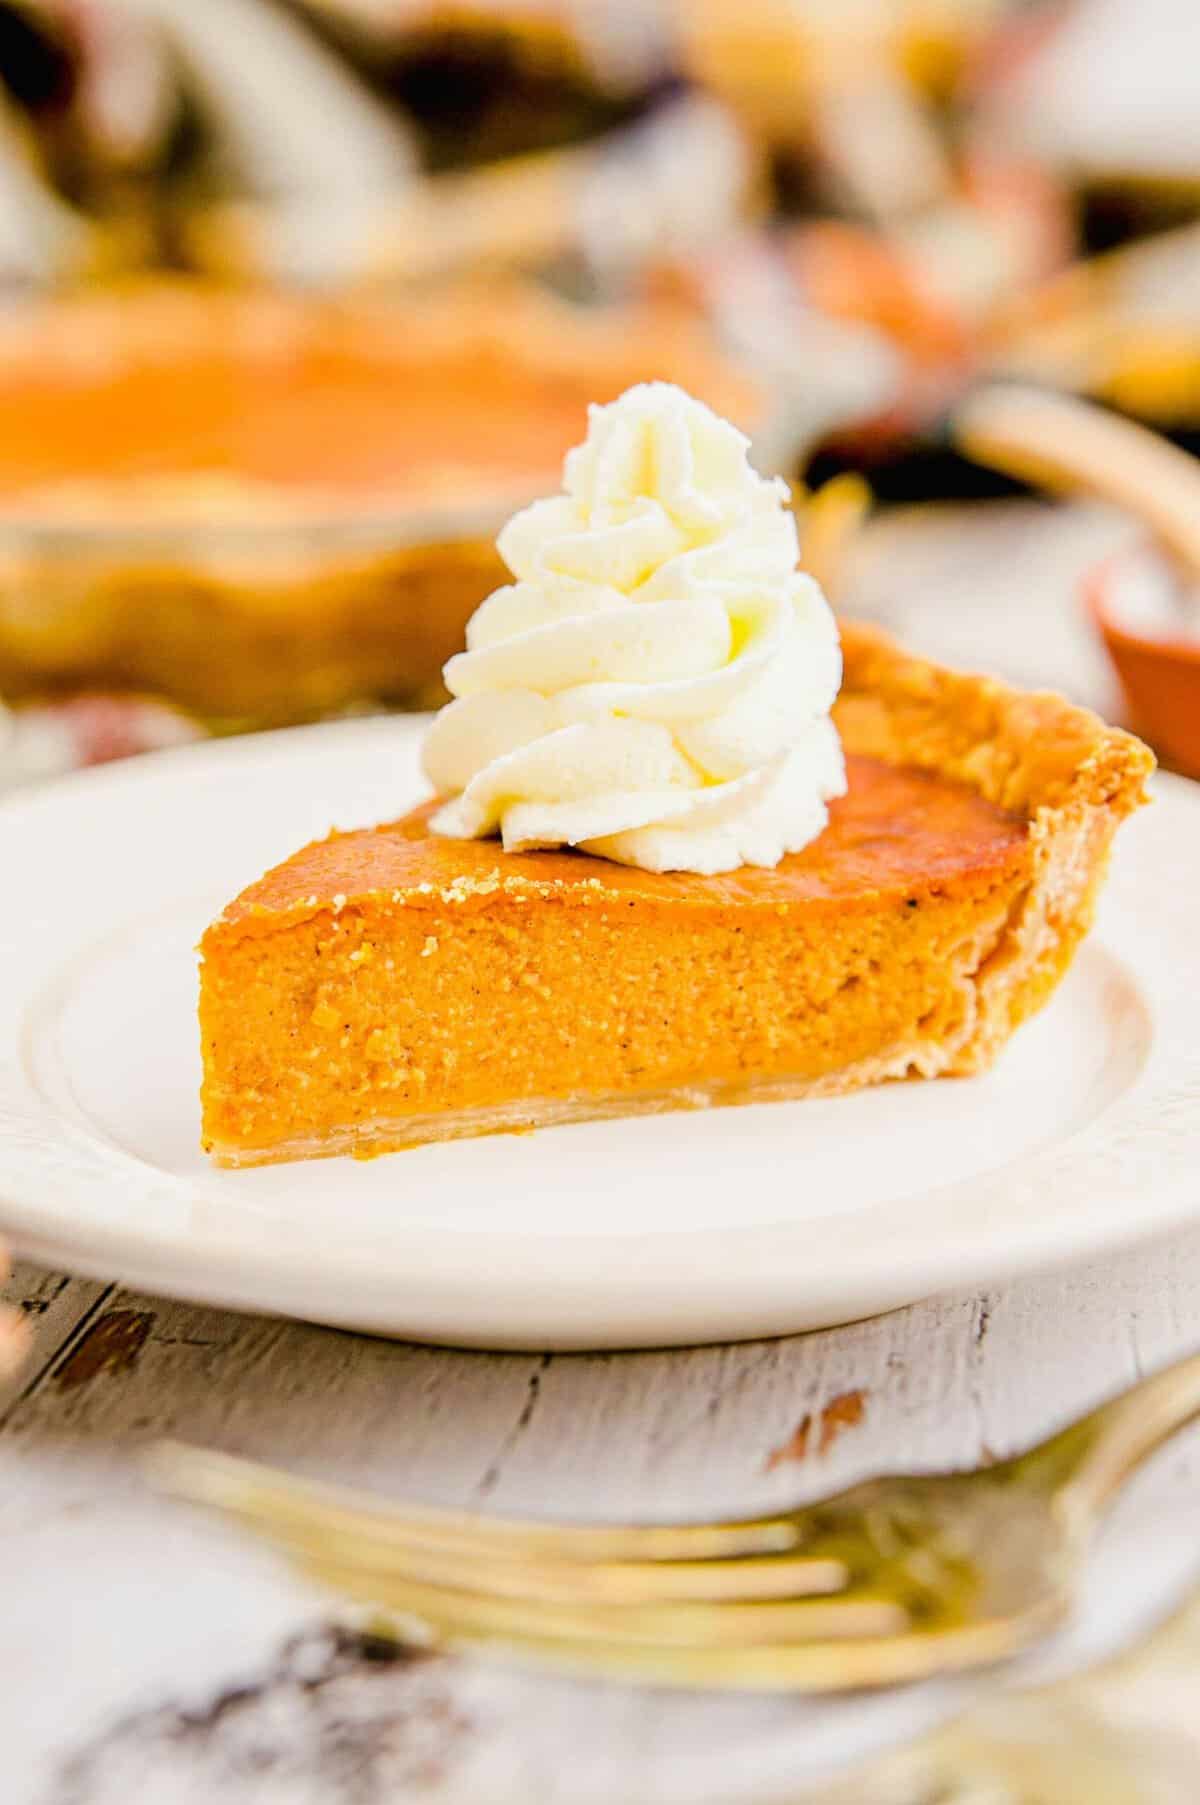 A swirl of fluffy white whipped cream is on top of a slice of pumpkin pie.